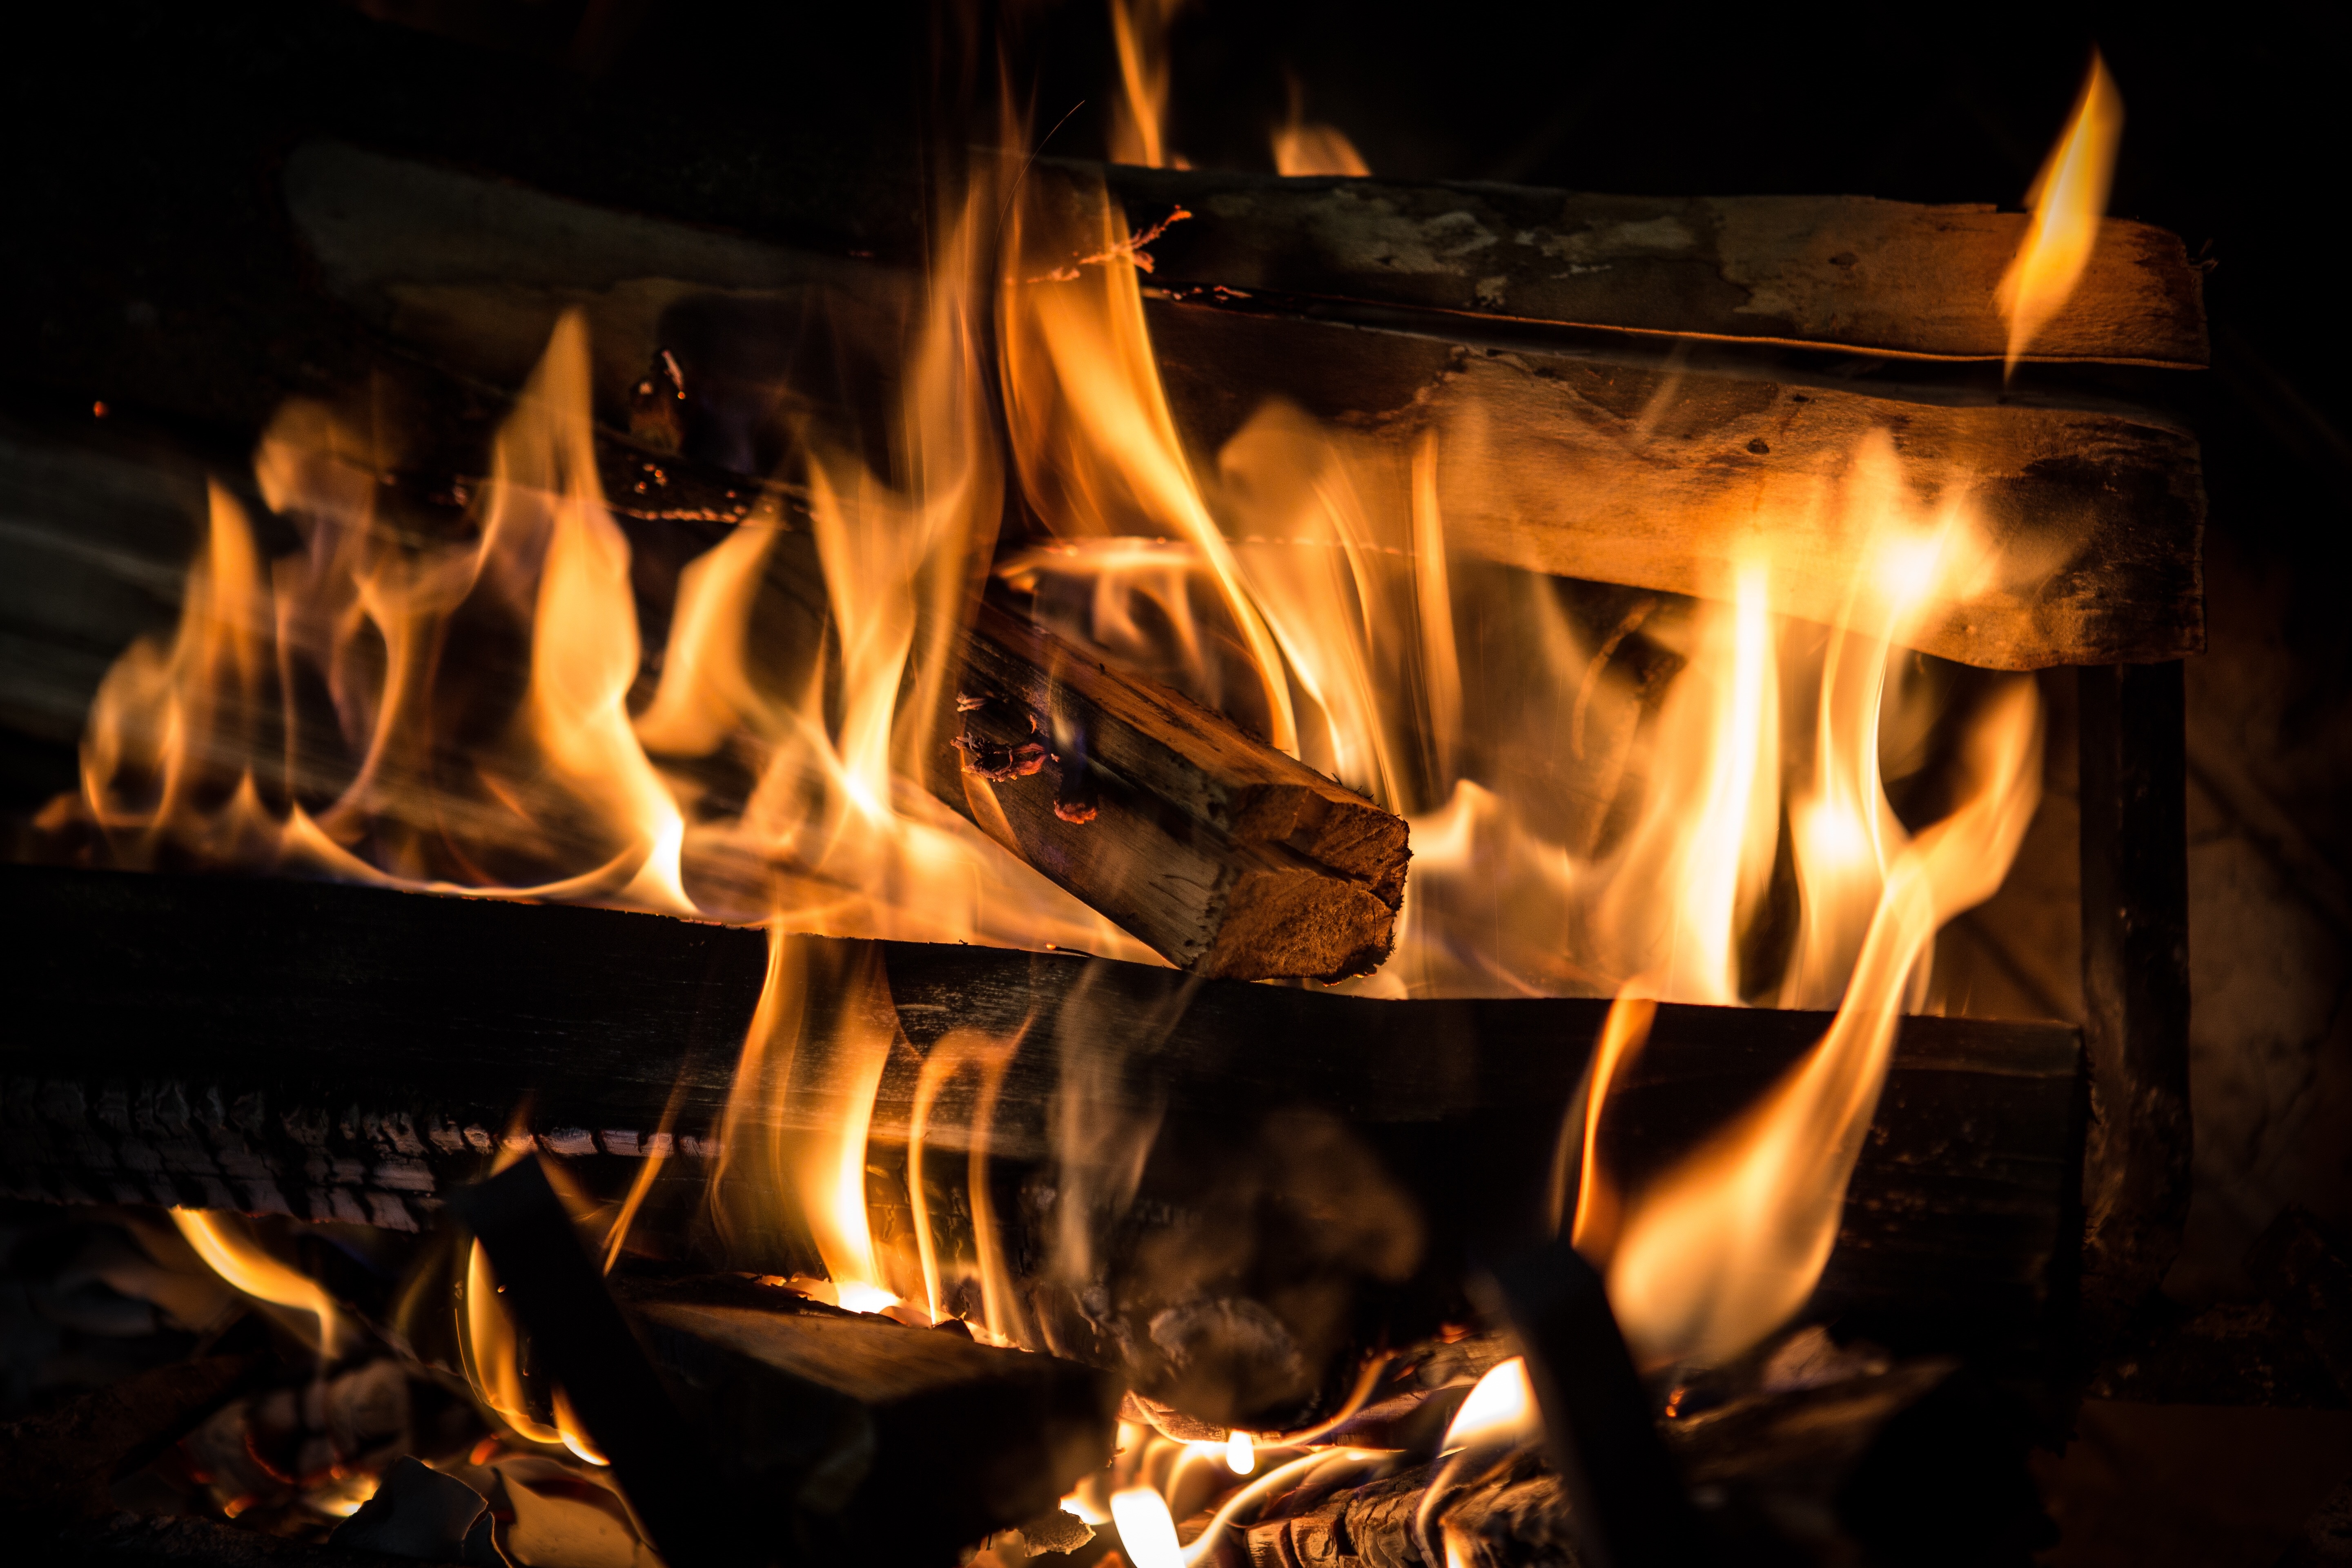 124043 Screensavers and Wallpapers Coals for phone. Download fire, coals, flame, miscellanea, miscellaneous, firewood, fireplace pictures for free